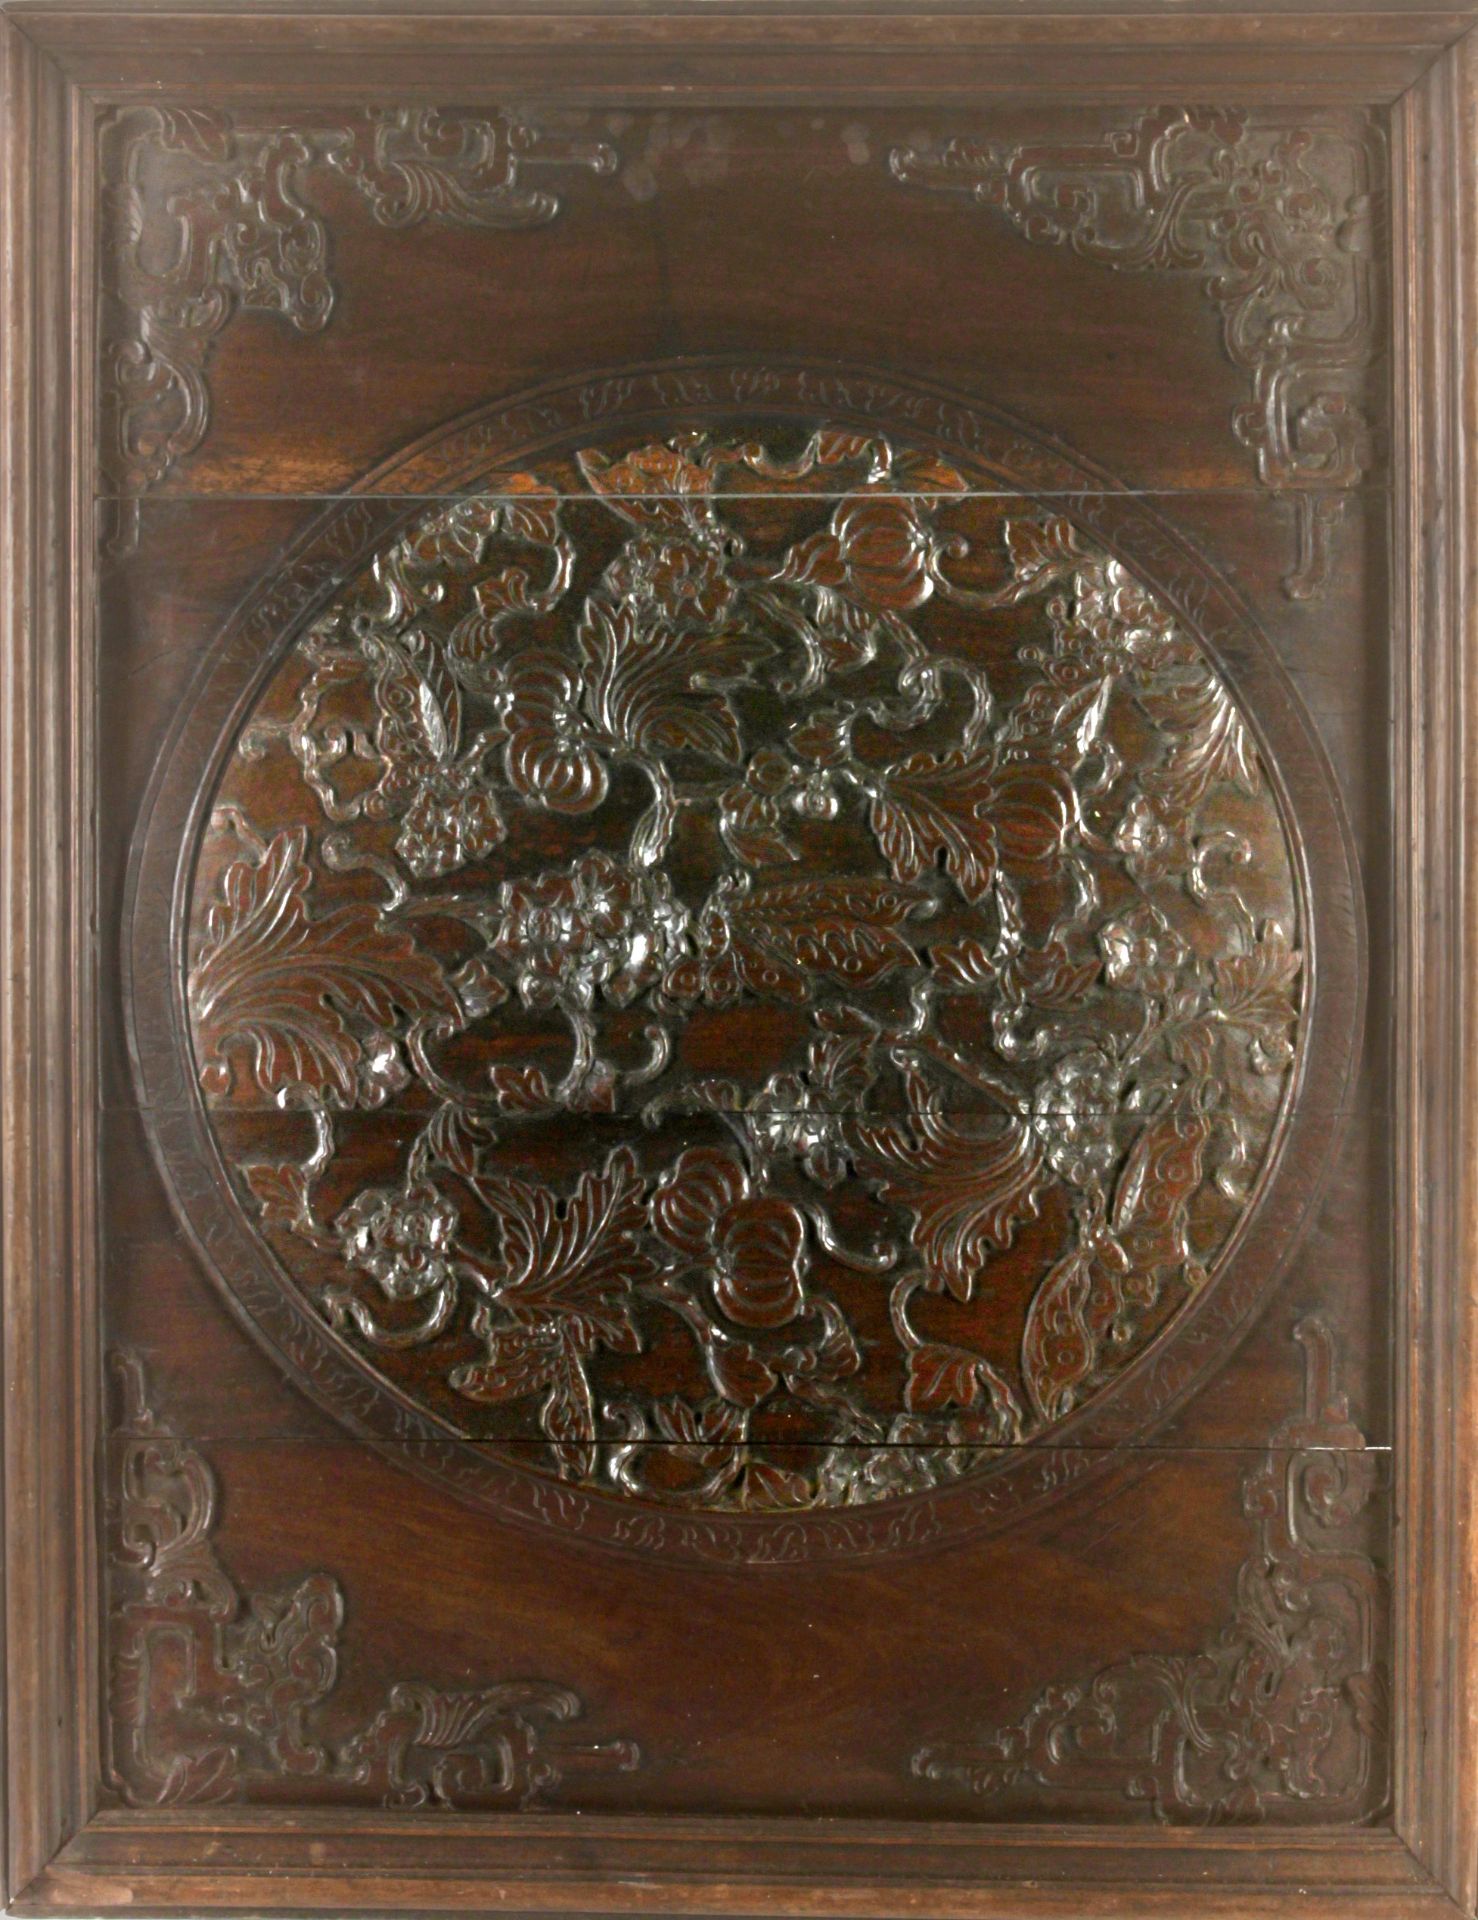 A Chinese carving from Qing dynasty possibly in zitan wood